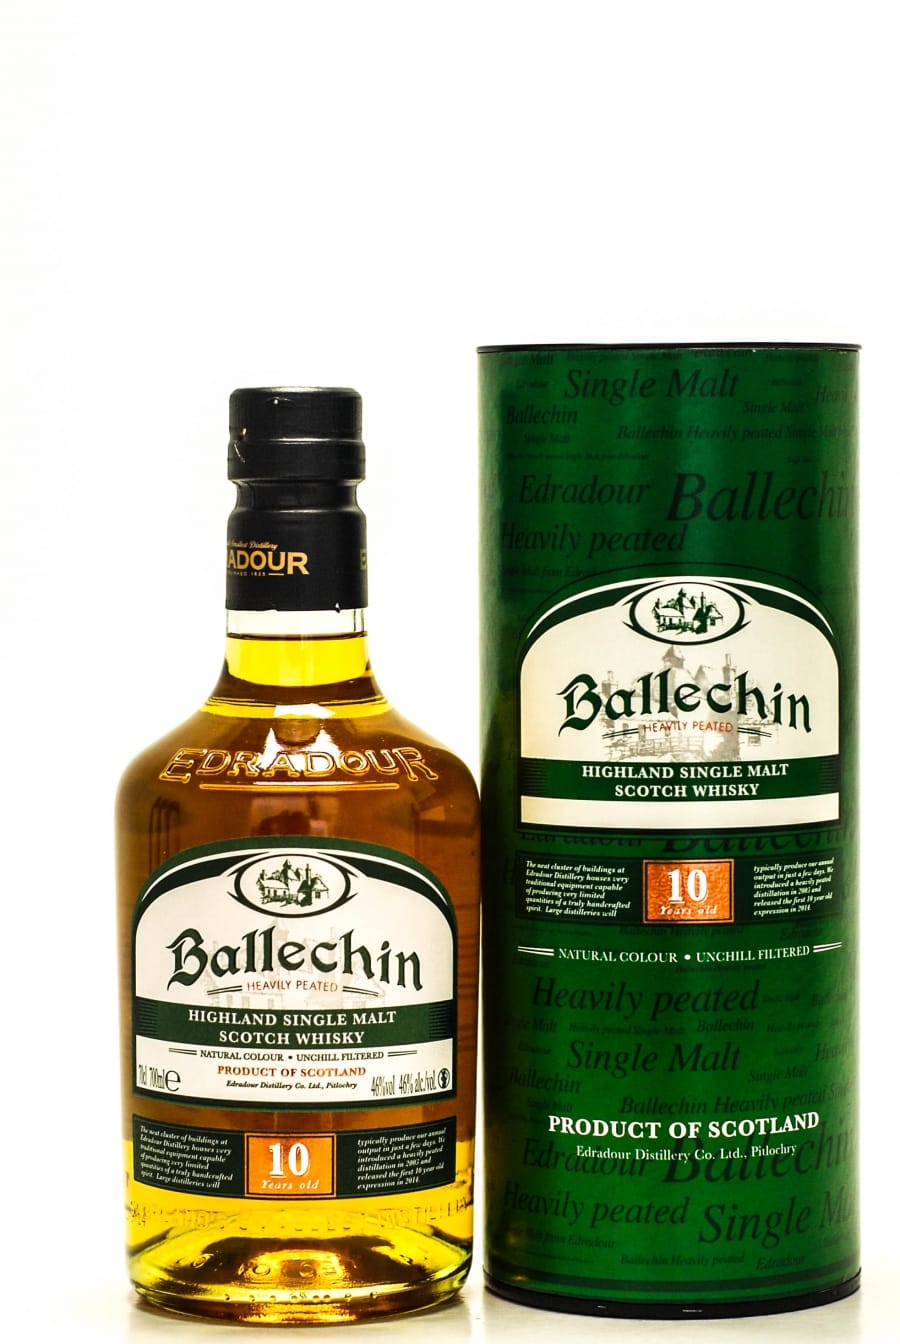 Edradour - Ballechin 10 Years Old 46% 2004 In Original Container